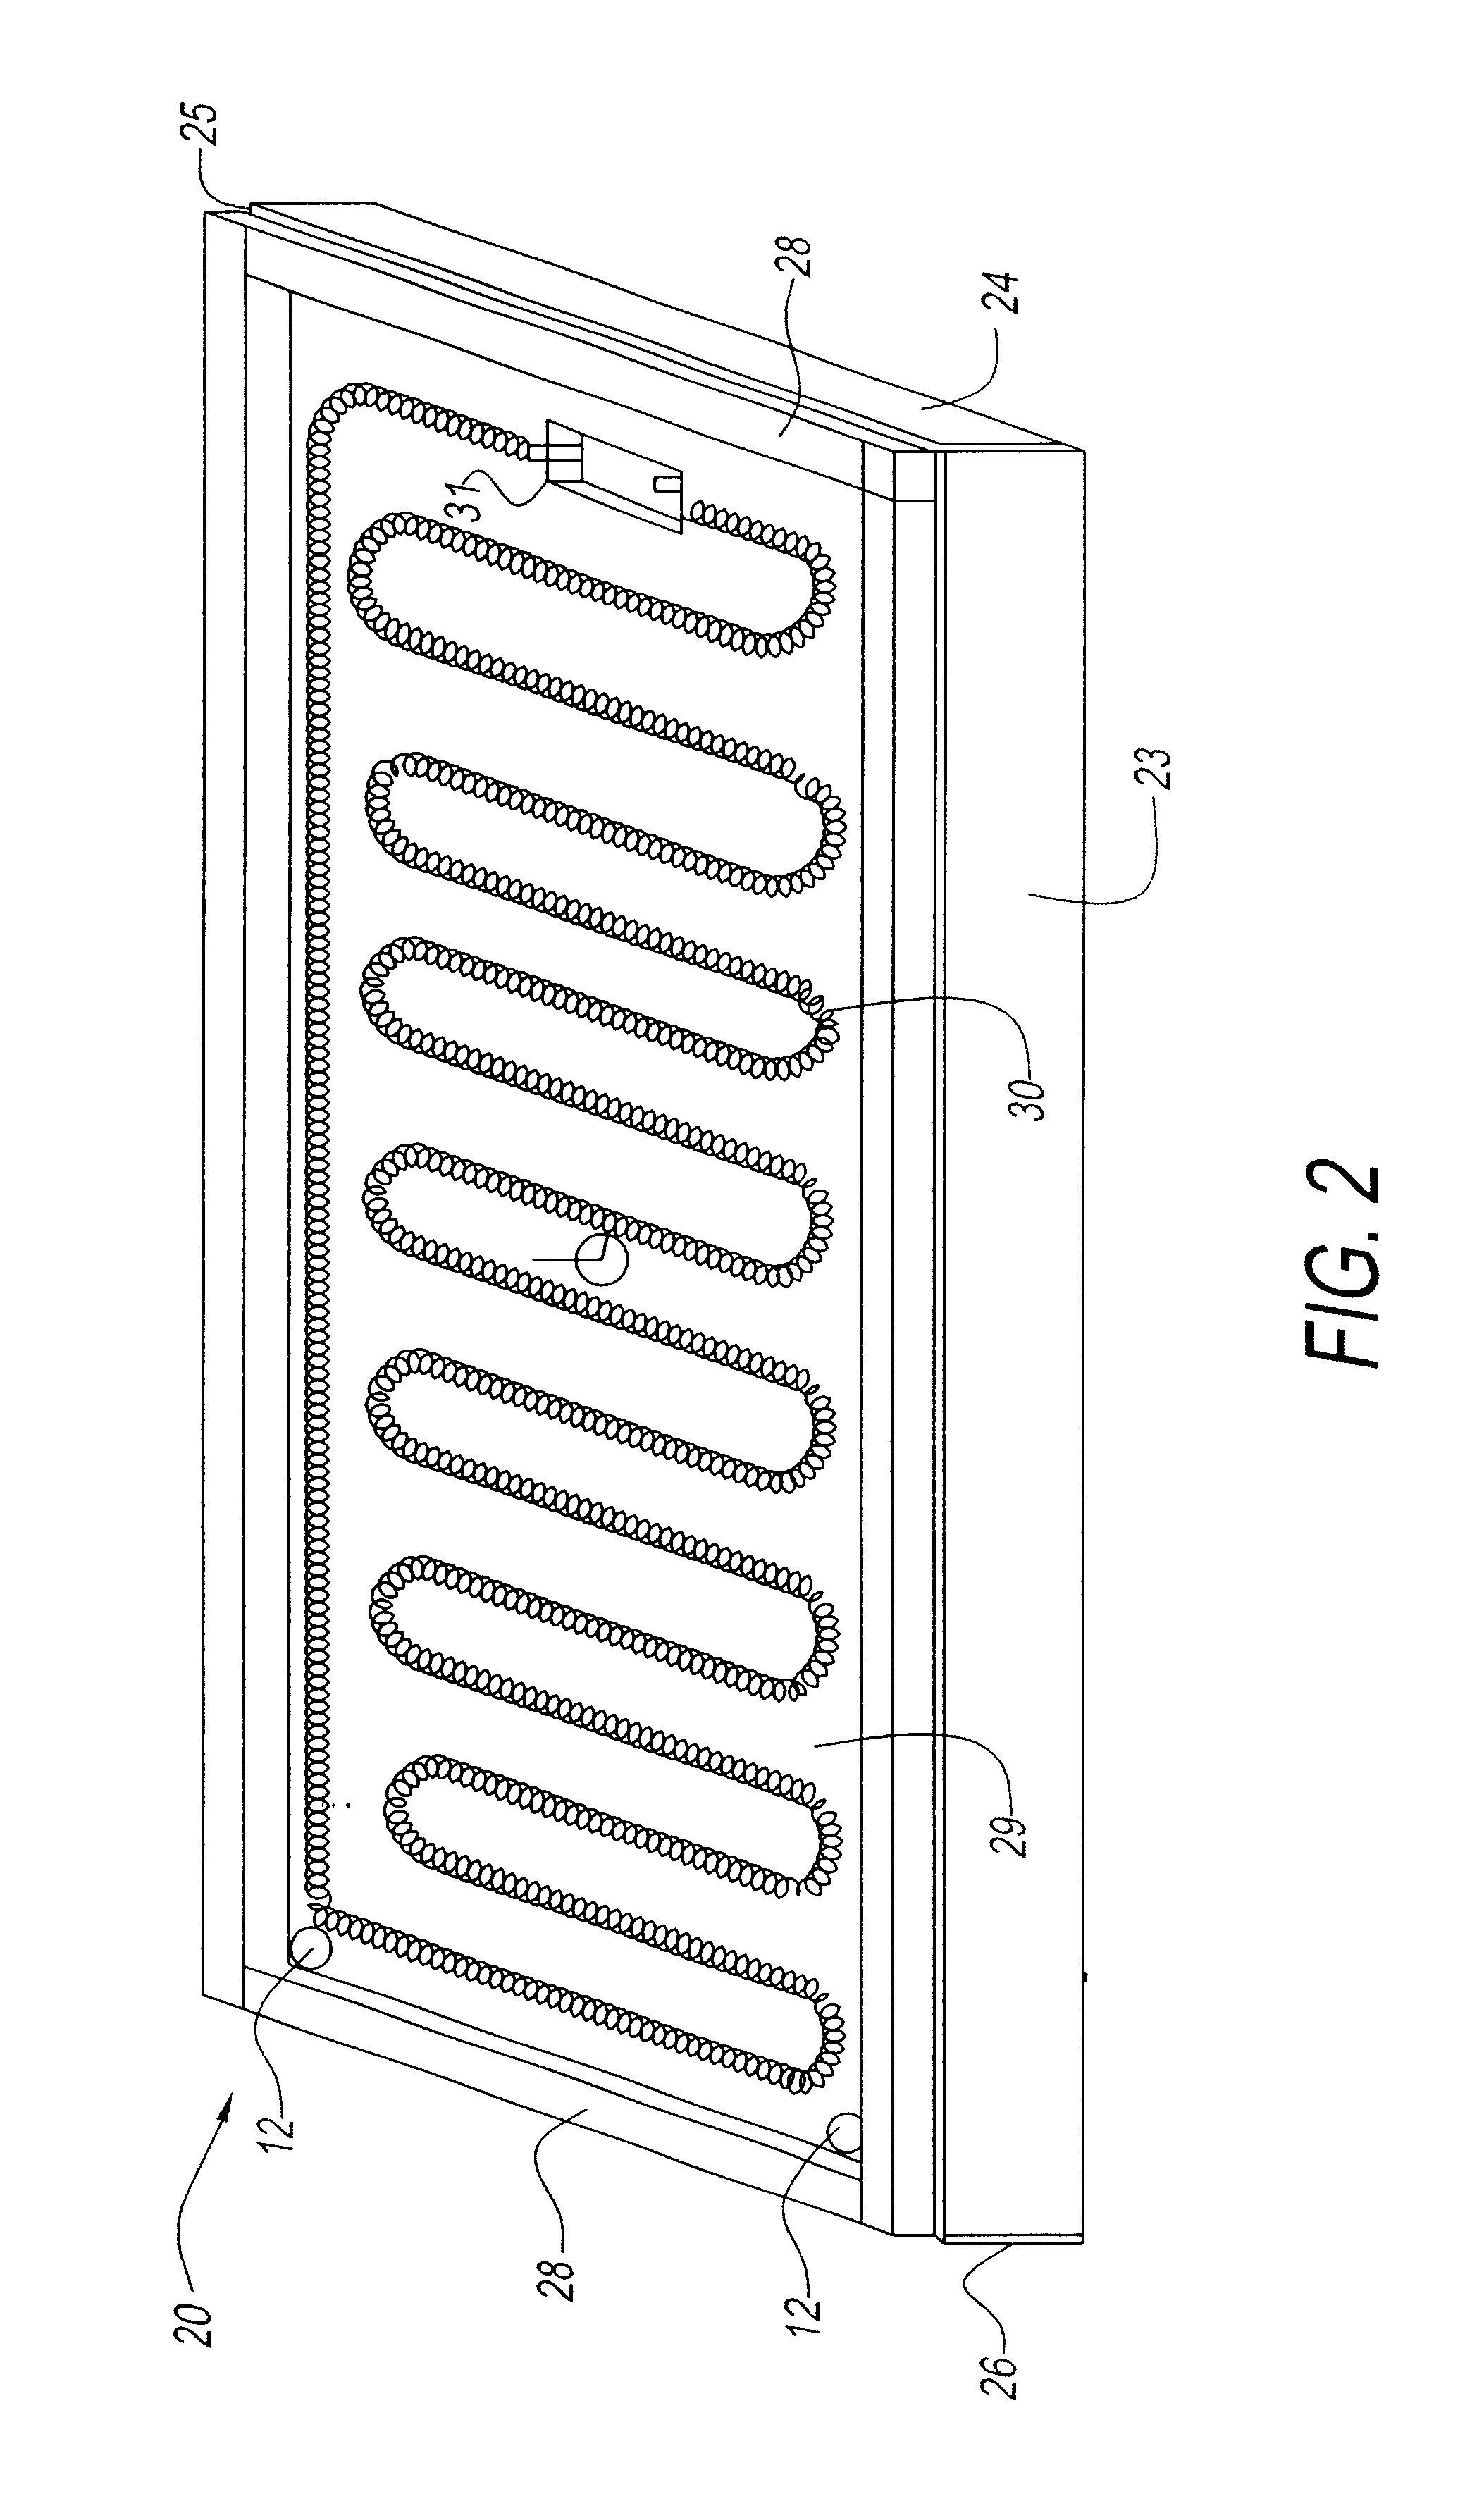 Griddle plate with infrared heating element